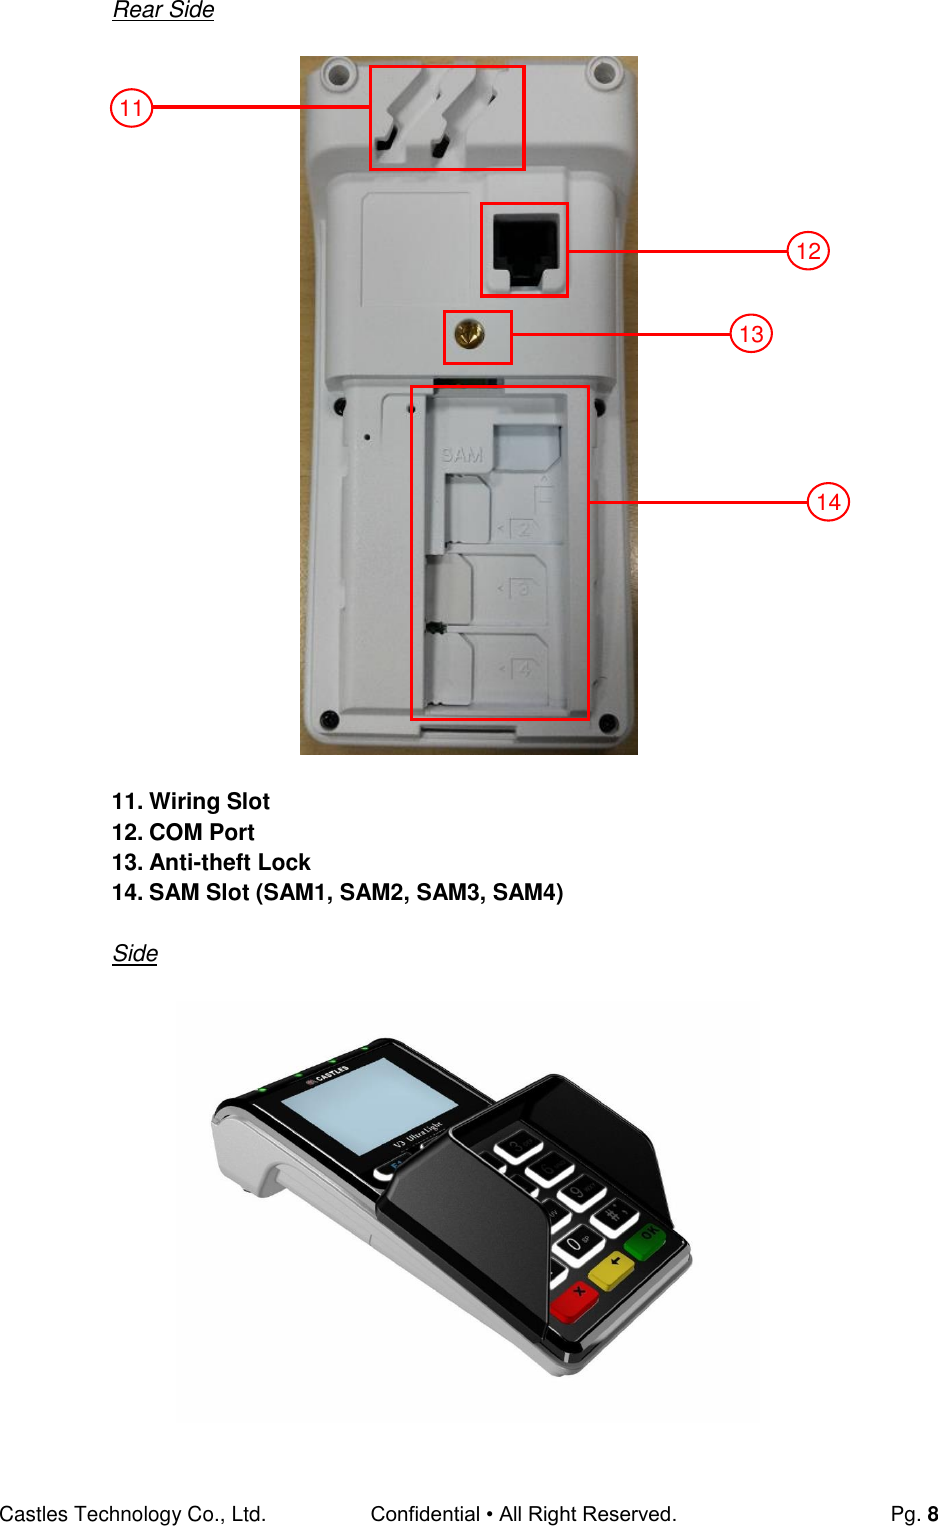 Castles Technology Co., Ltd. Confidential • All Right Reserved.  Pg. 8 Rear Side    11. Wiring Slot 12. COM Port 13. Anti-theft Lock 14. SAM Slot (SAM1, SAM2, SAM3, SAM4)  Side   11 12 14 13 